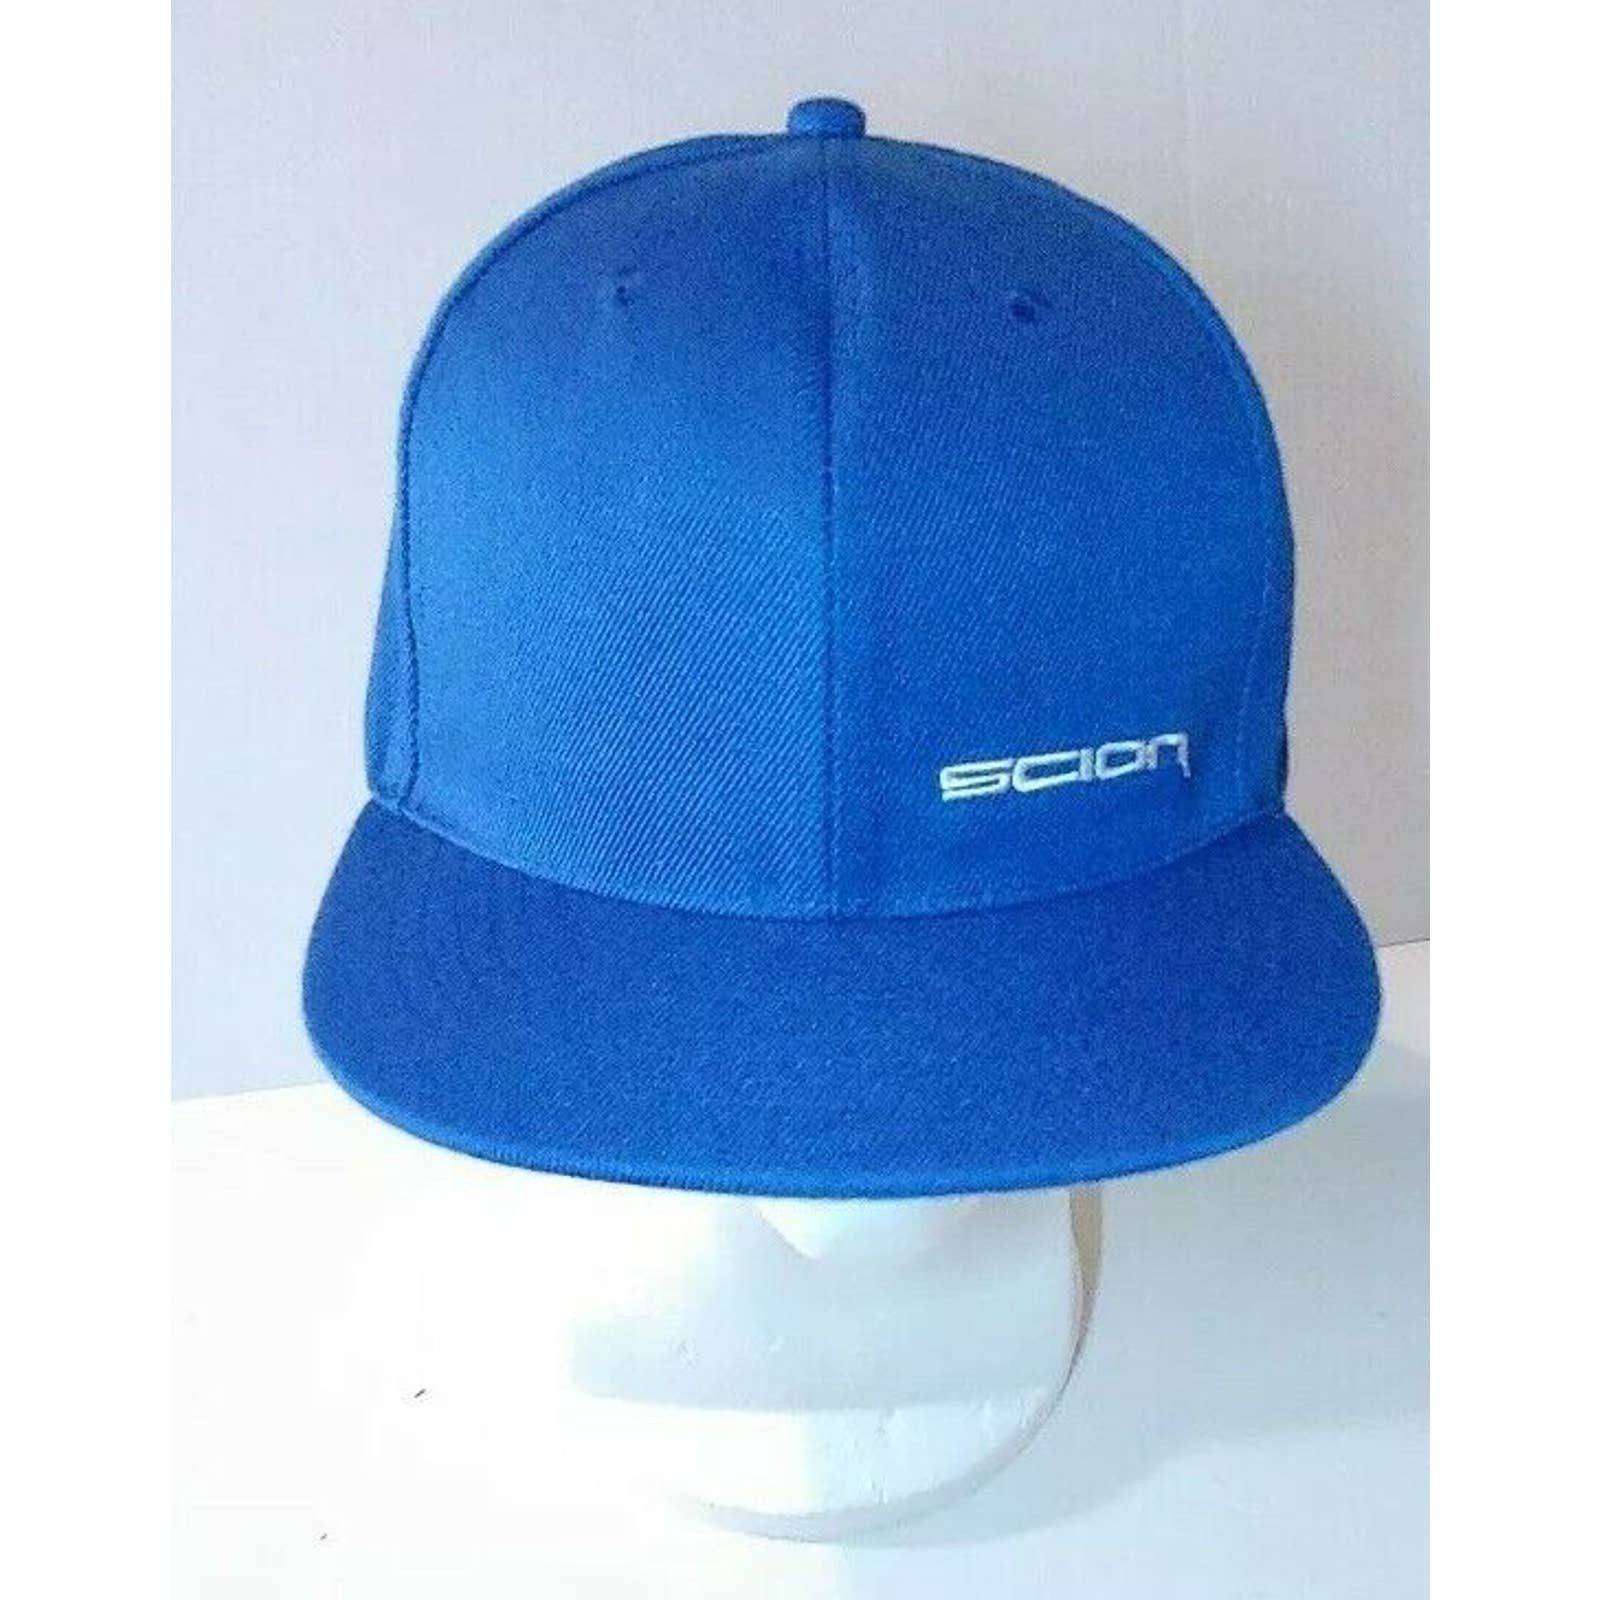 Other SCION TOYOTA Baseball Cap Hat Adjustable Blue Snapback Size ONE SIZE - 6 Preview